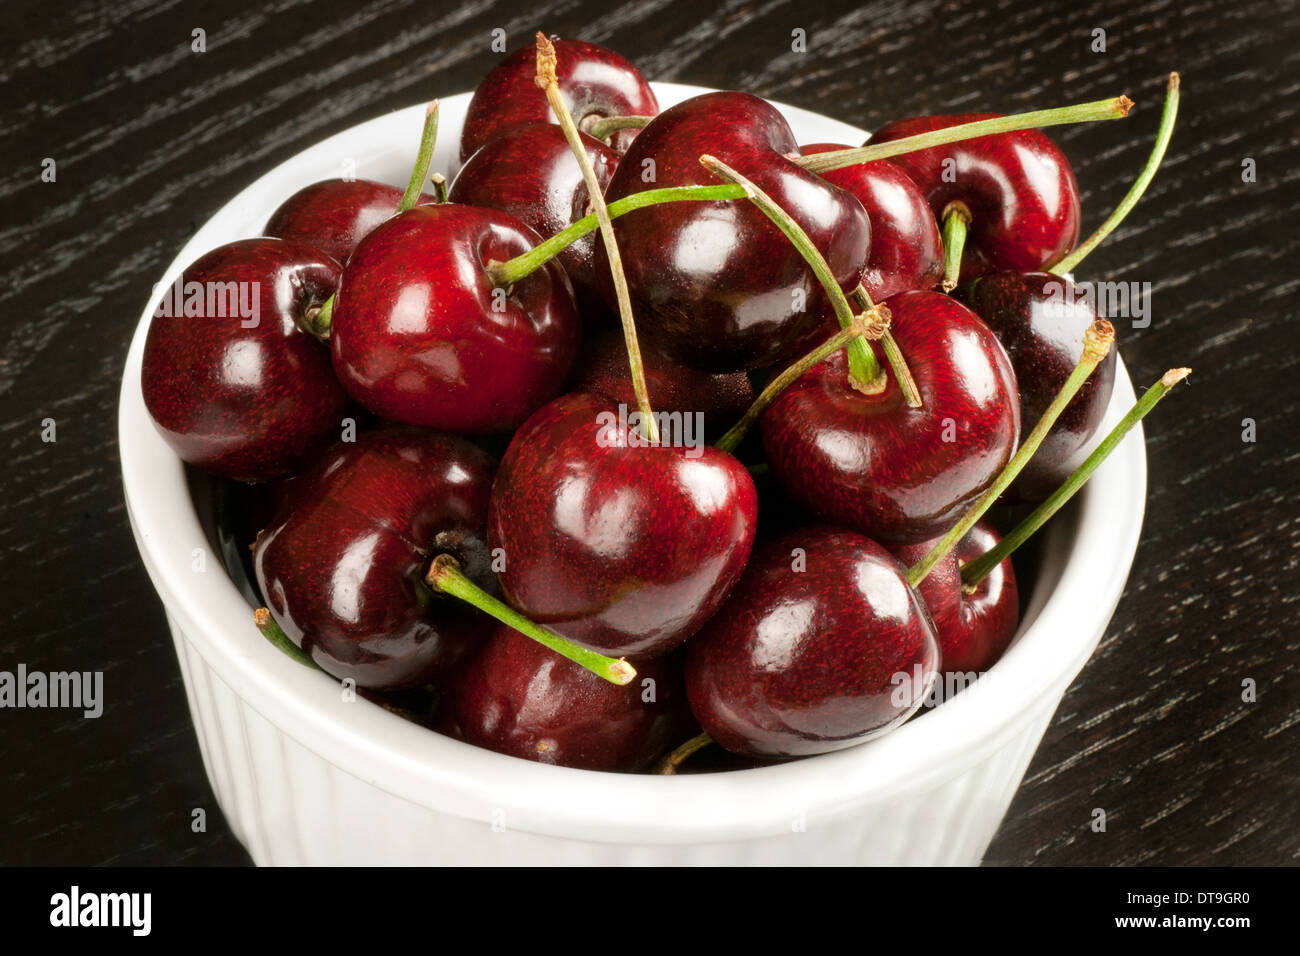 Close-up of a bowl of cherries. Stock Photo